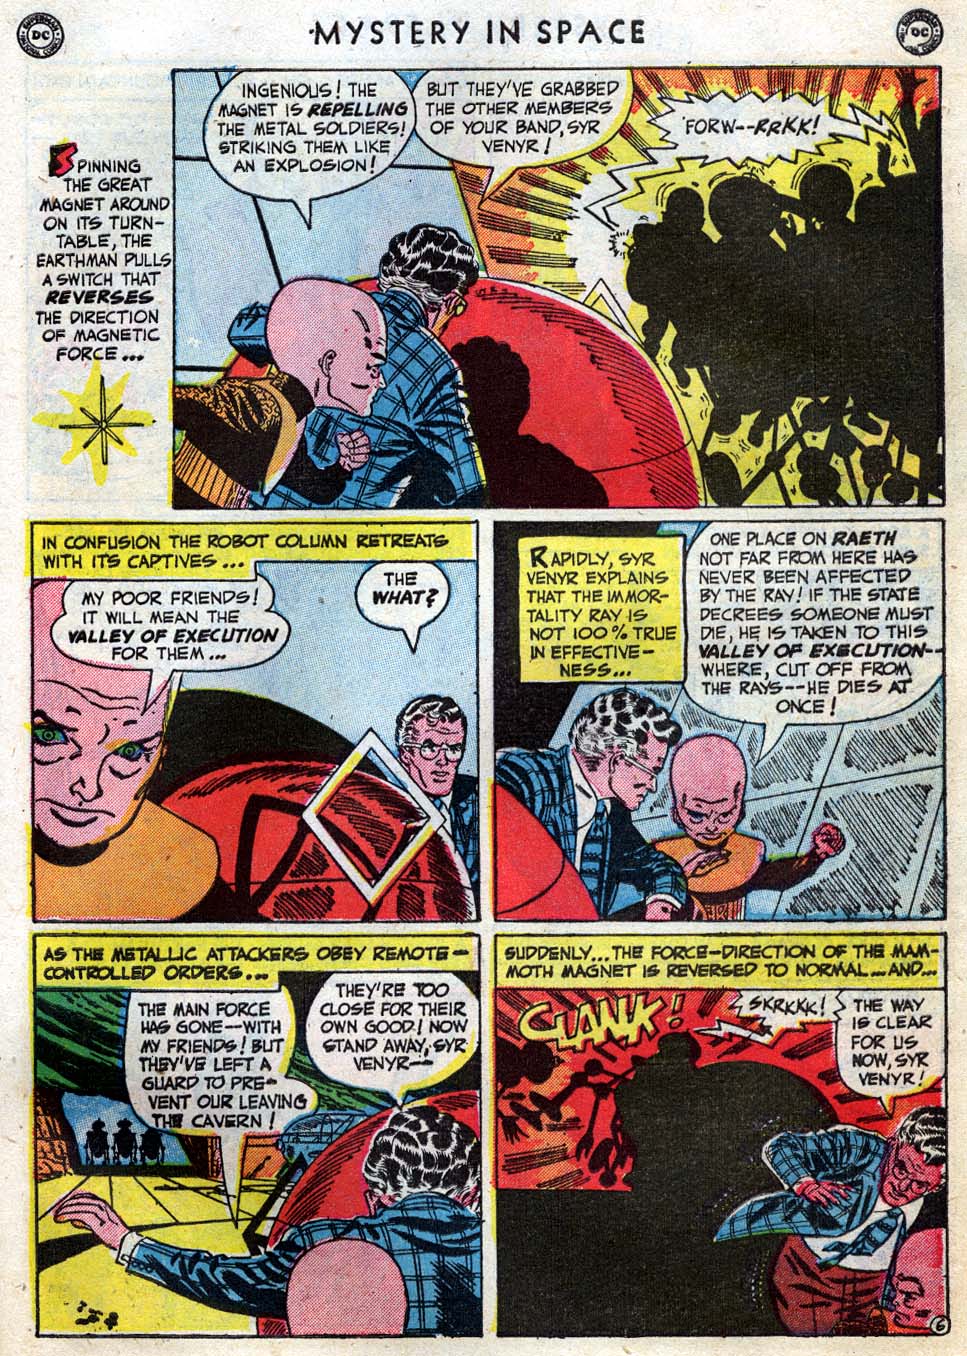 Mystery in Space (1951) 1 Page 44